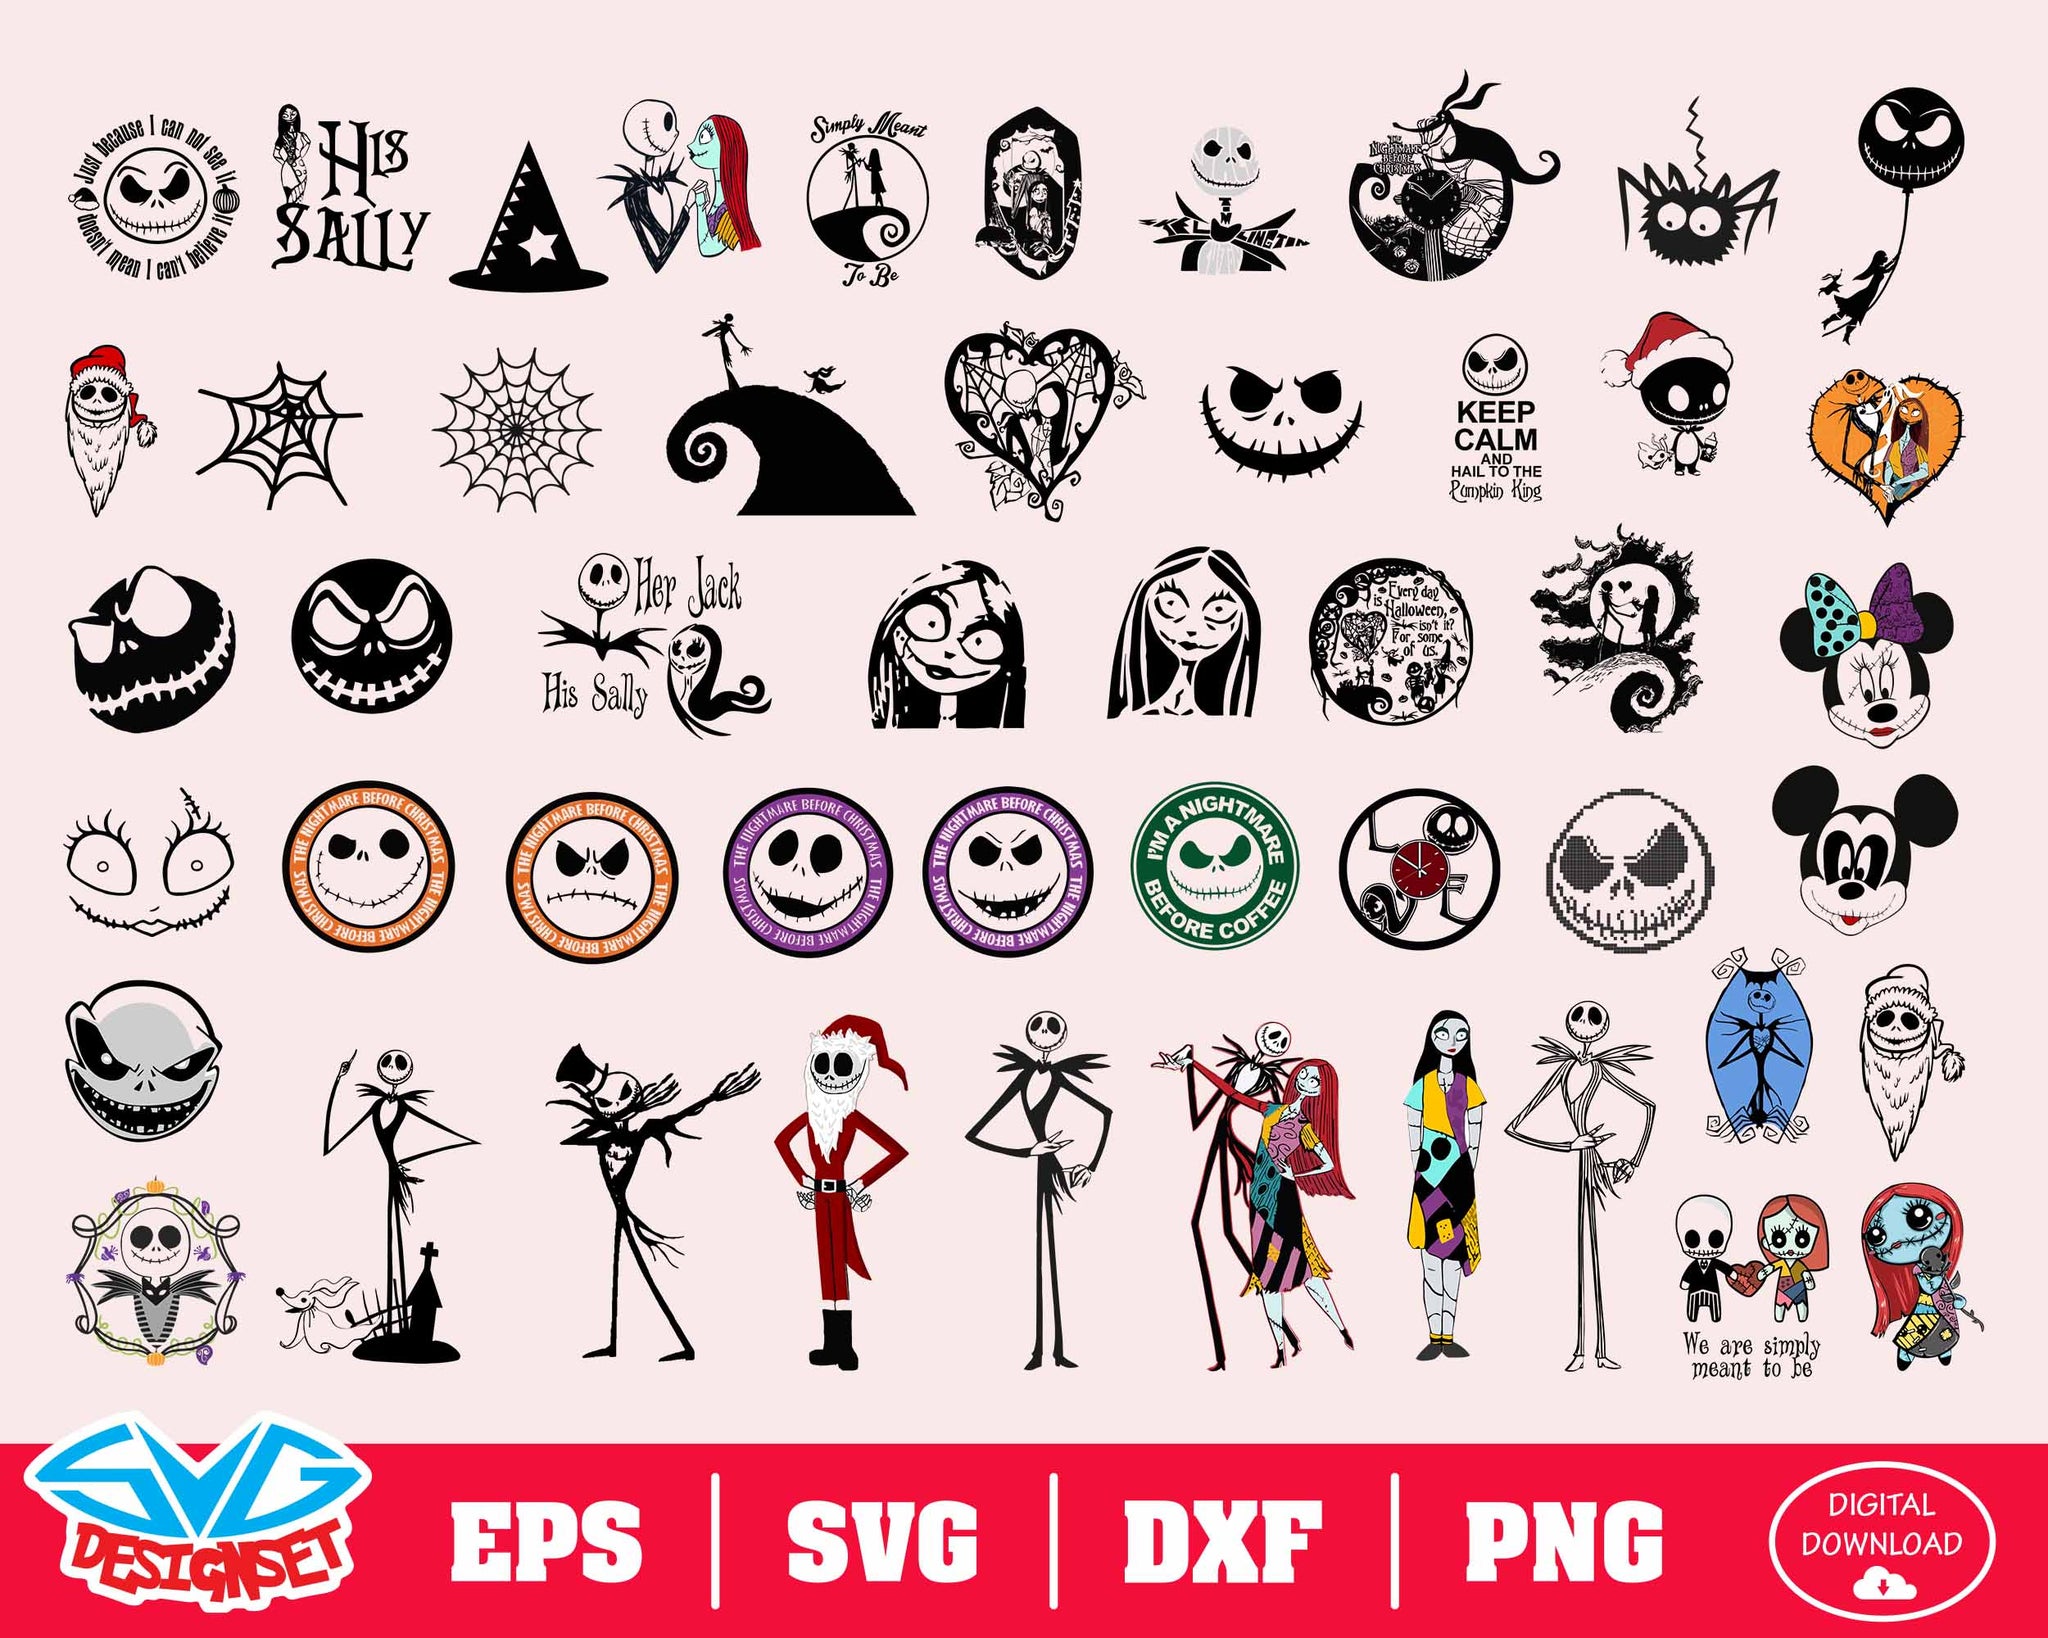 The Nightmare Before Christmas Svg, Dxf, Eps, Png, Clipart, Silhouette and Cutfiles #3 - SVGDesignSets